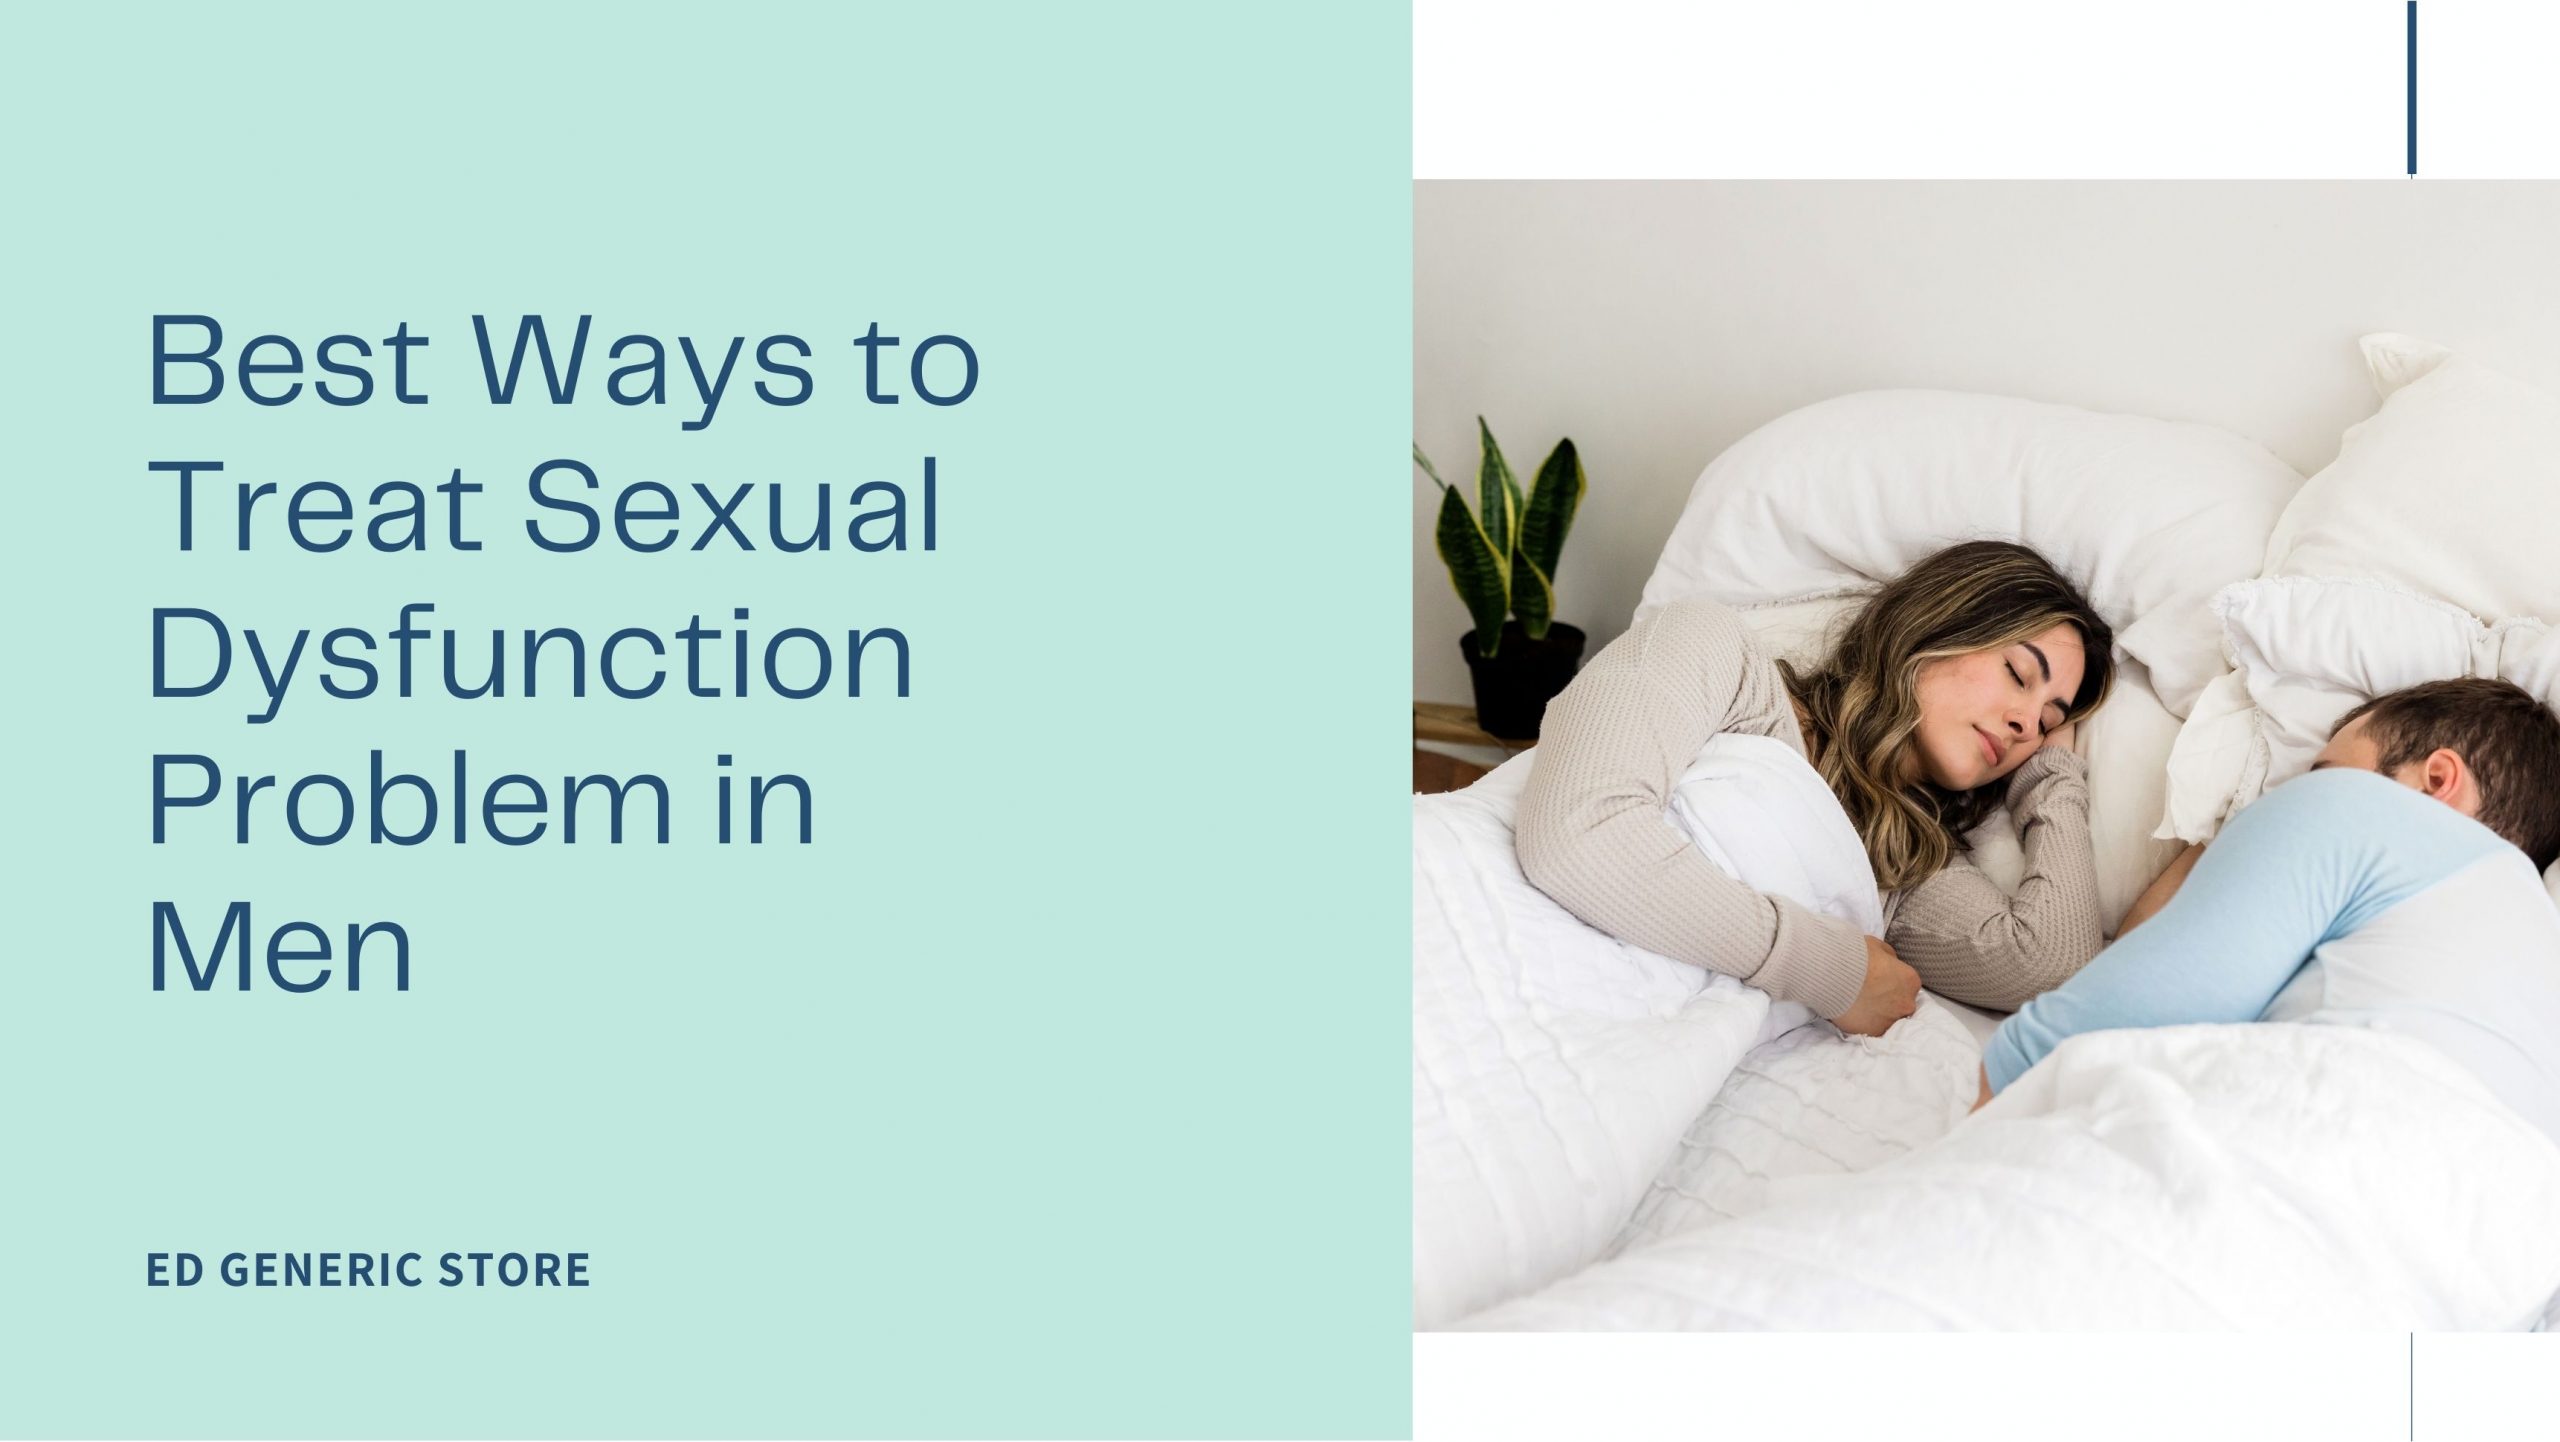 Treat Sexual Dysfunction